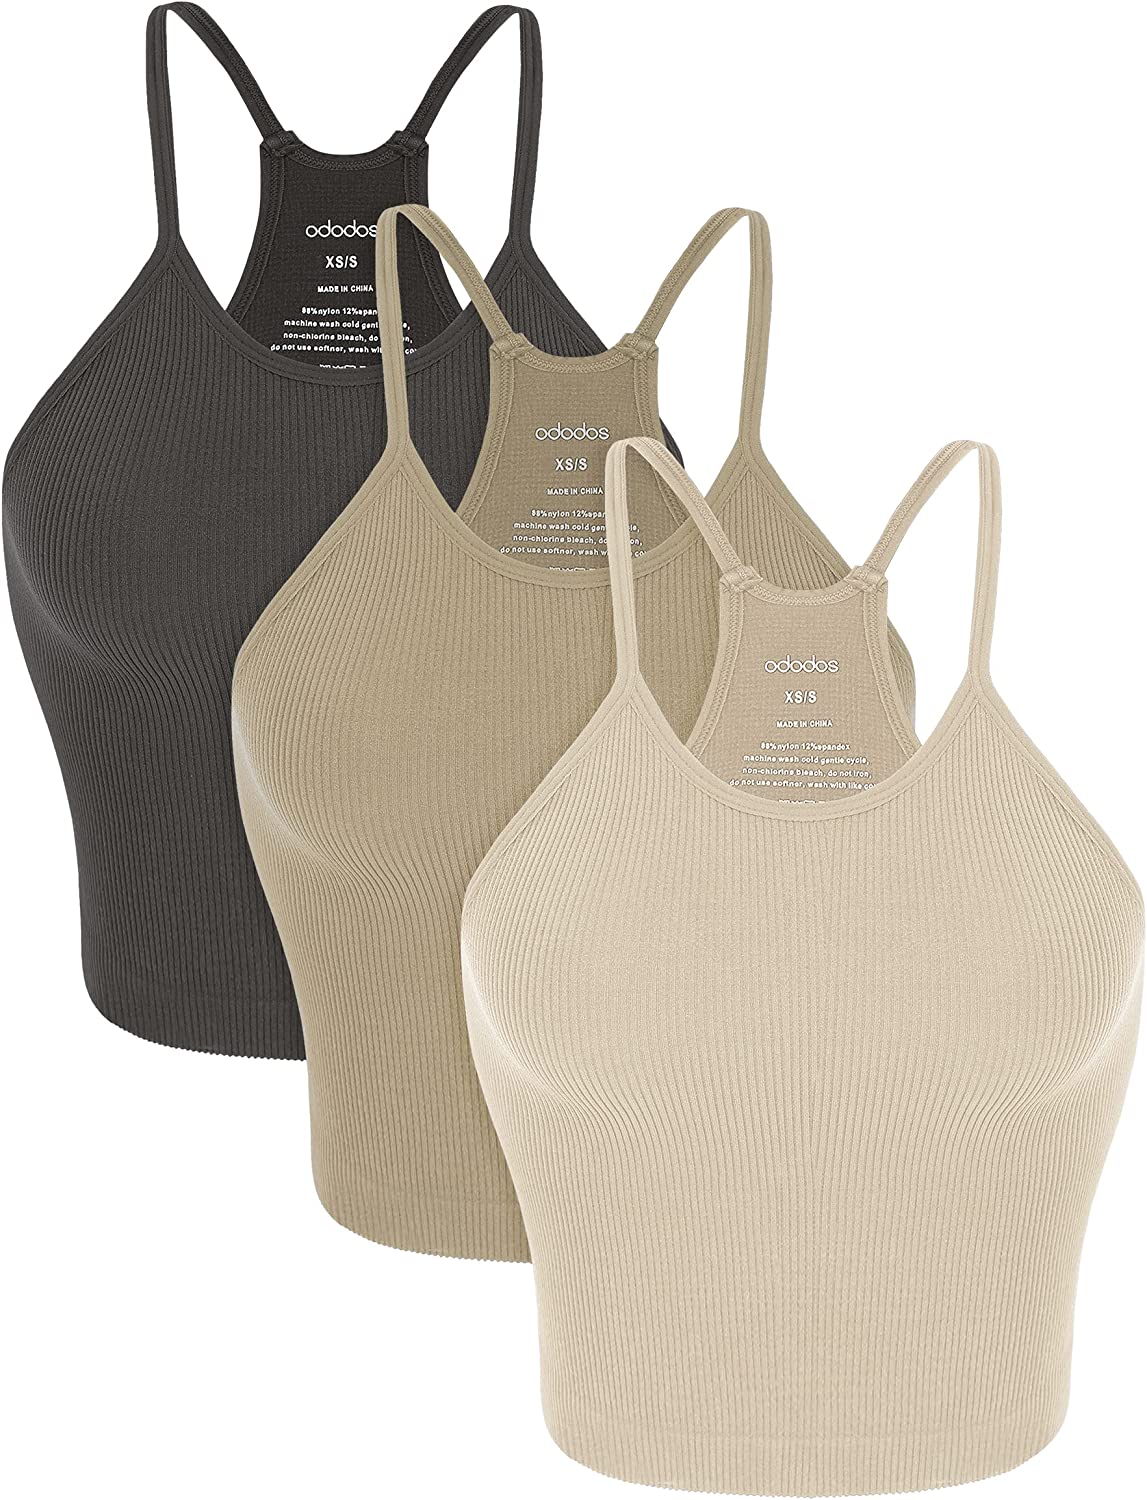 ODODOS 3-Pack Seamless Square Neck Crop Tank for Women Ribbed Knit